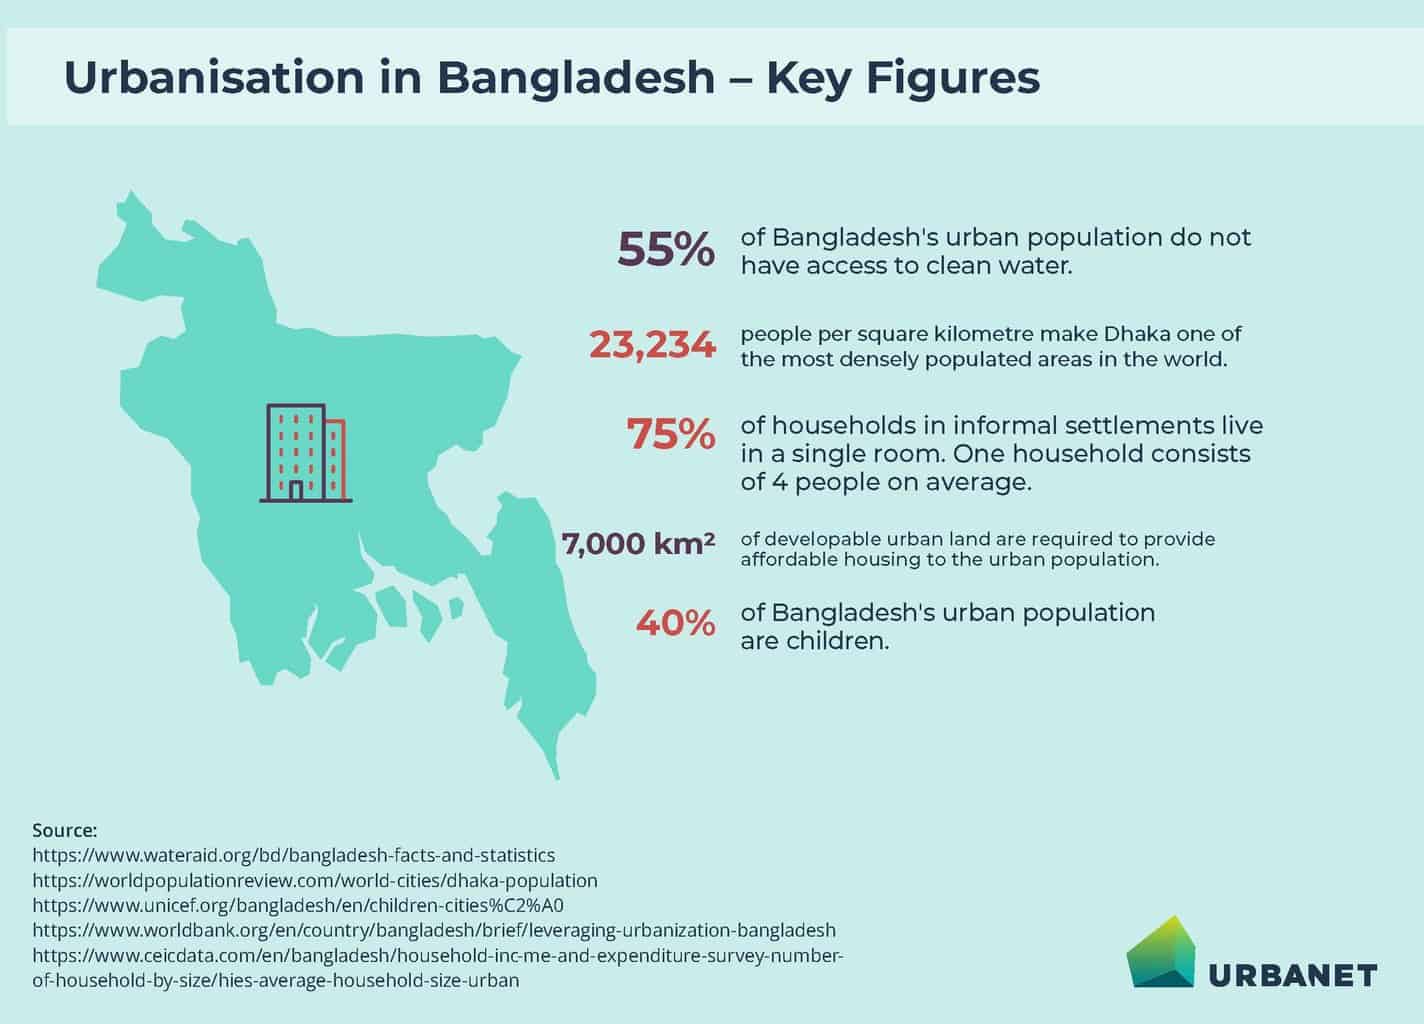 There are several interesting facts to know about urban develeopmt in Bangladesh.